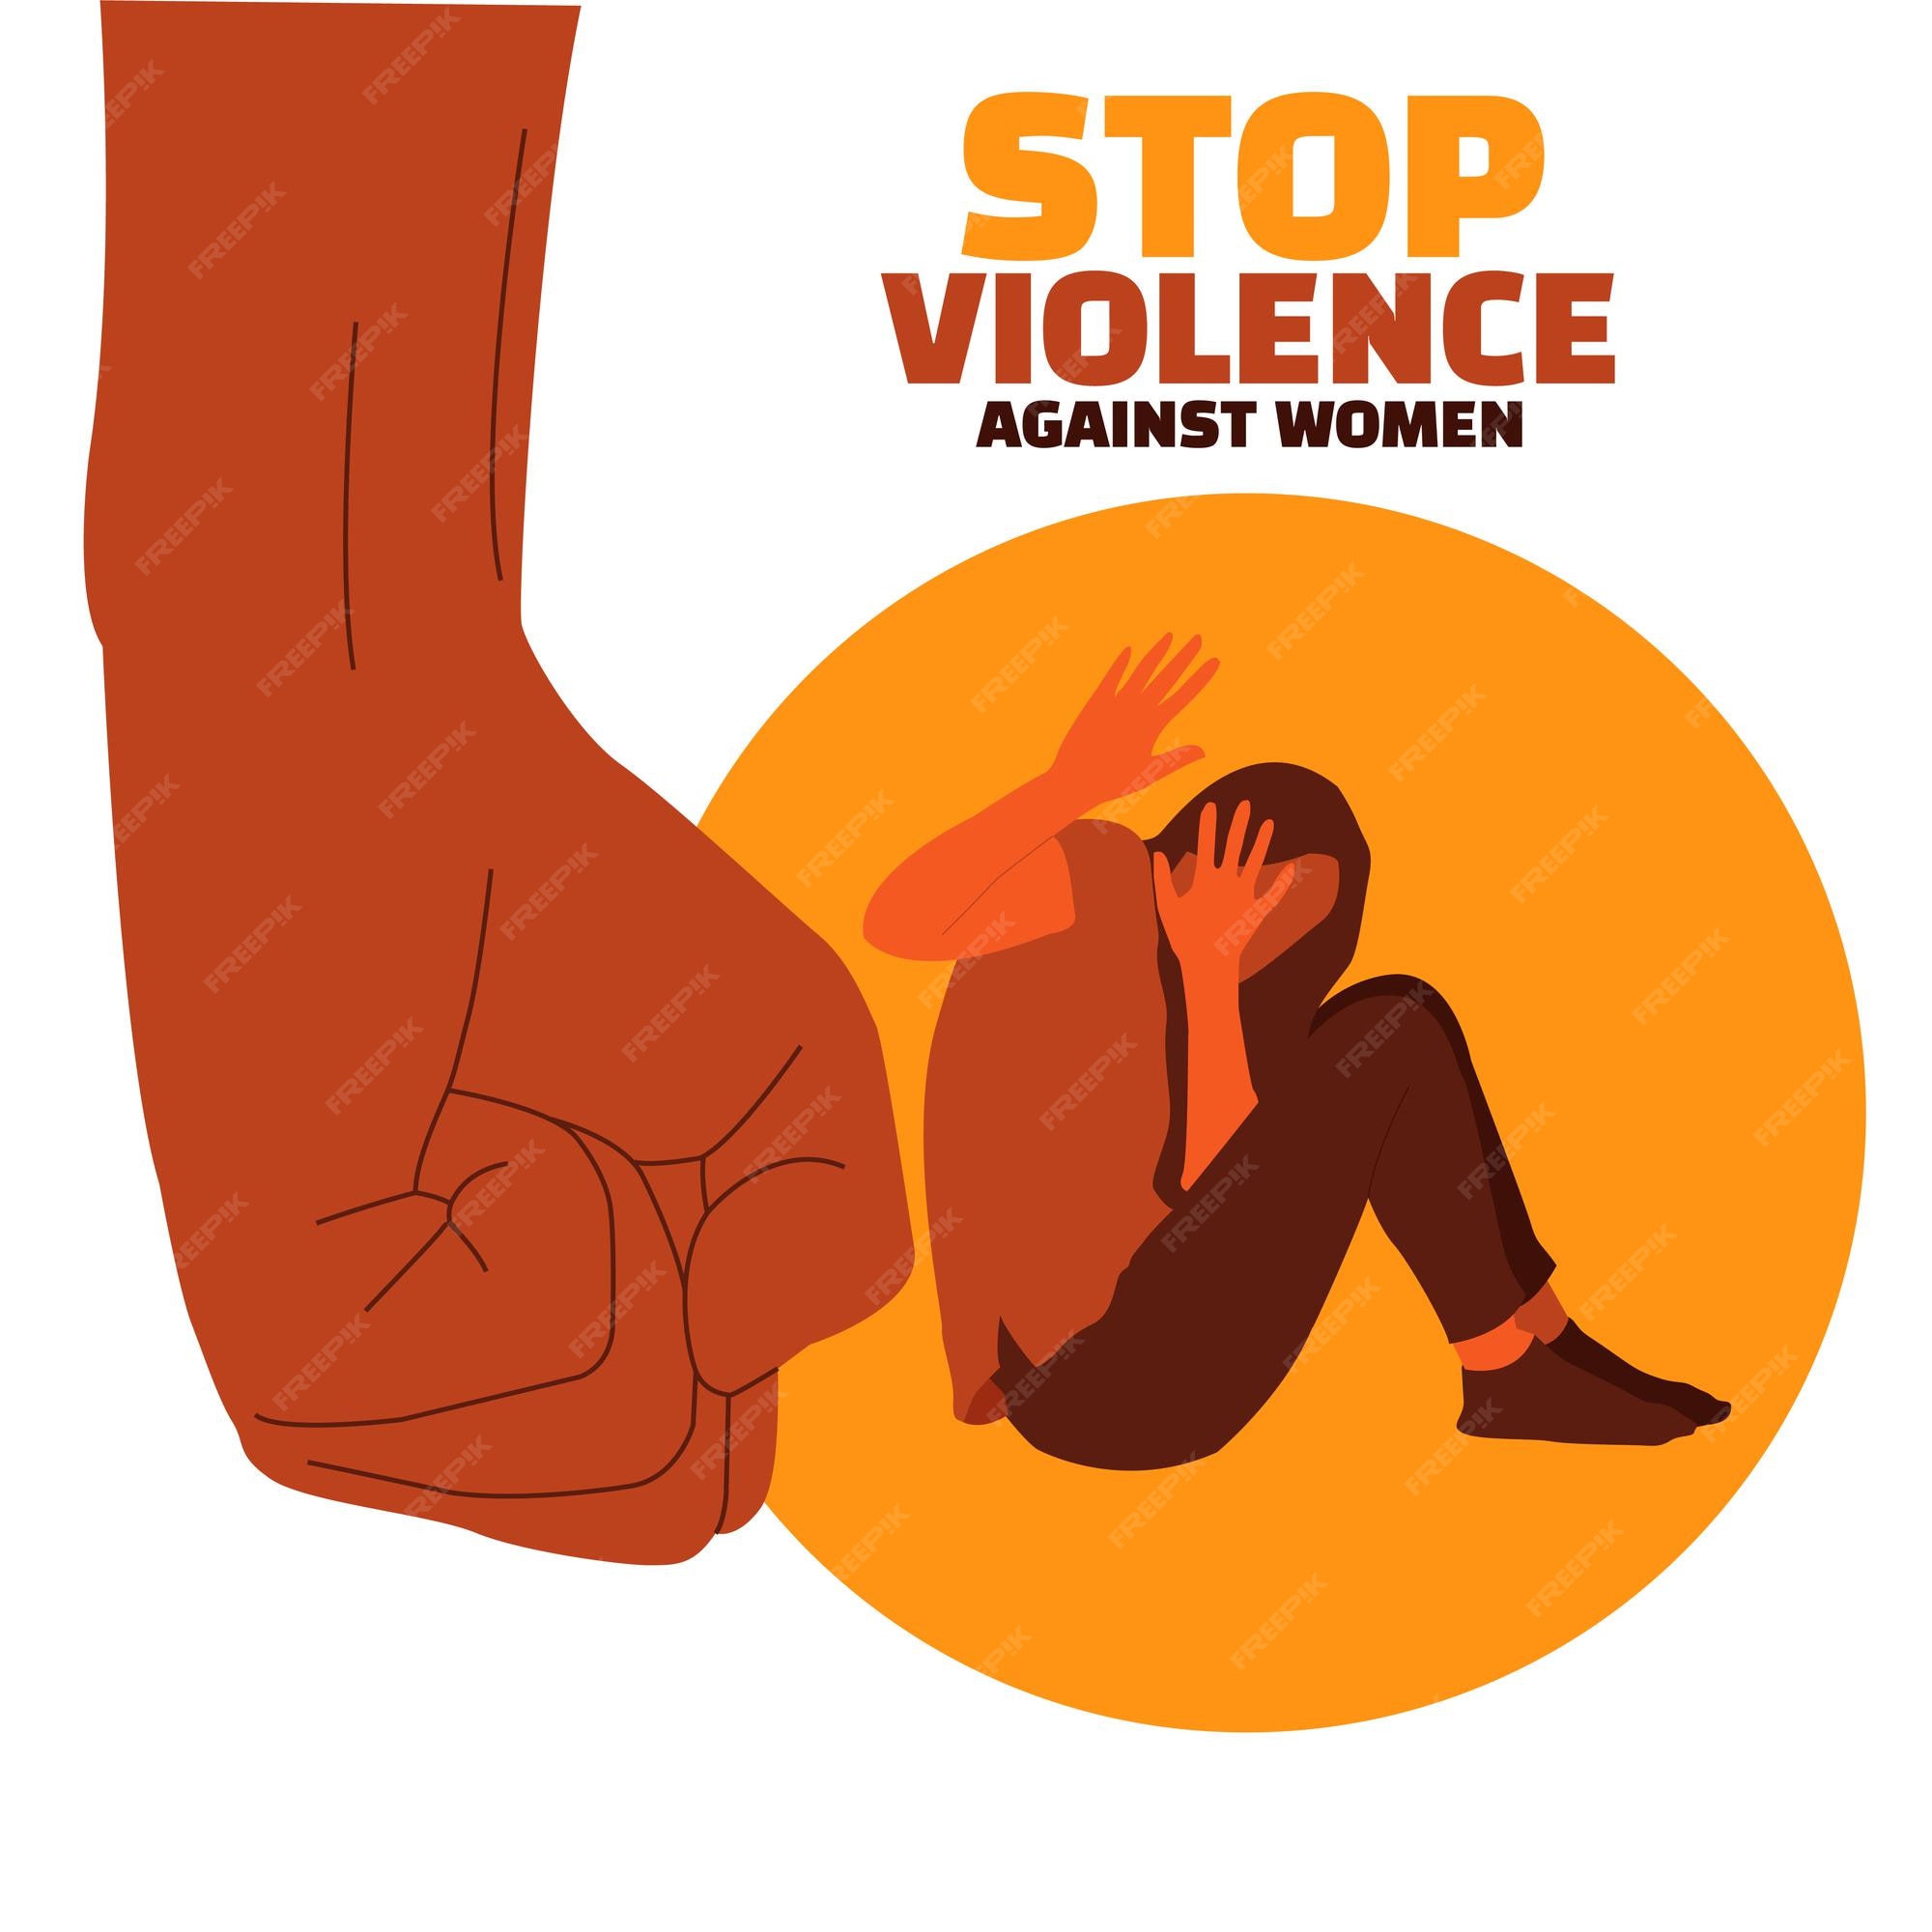 Illustration Of The Day To Stop Violence Against Women 7496 1632 ?w=2000